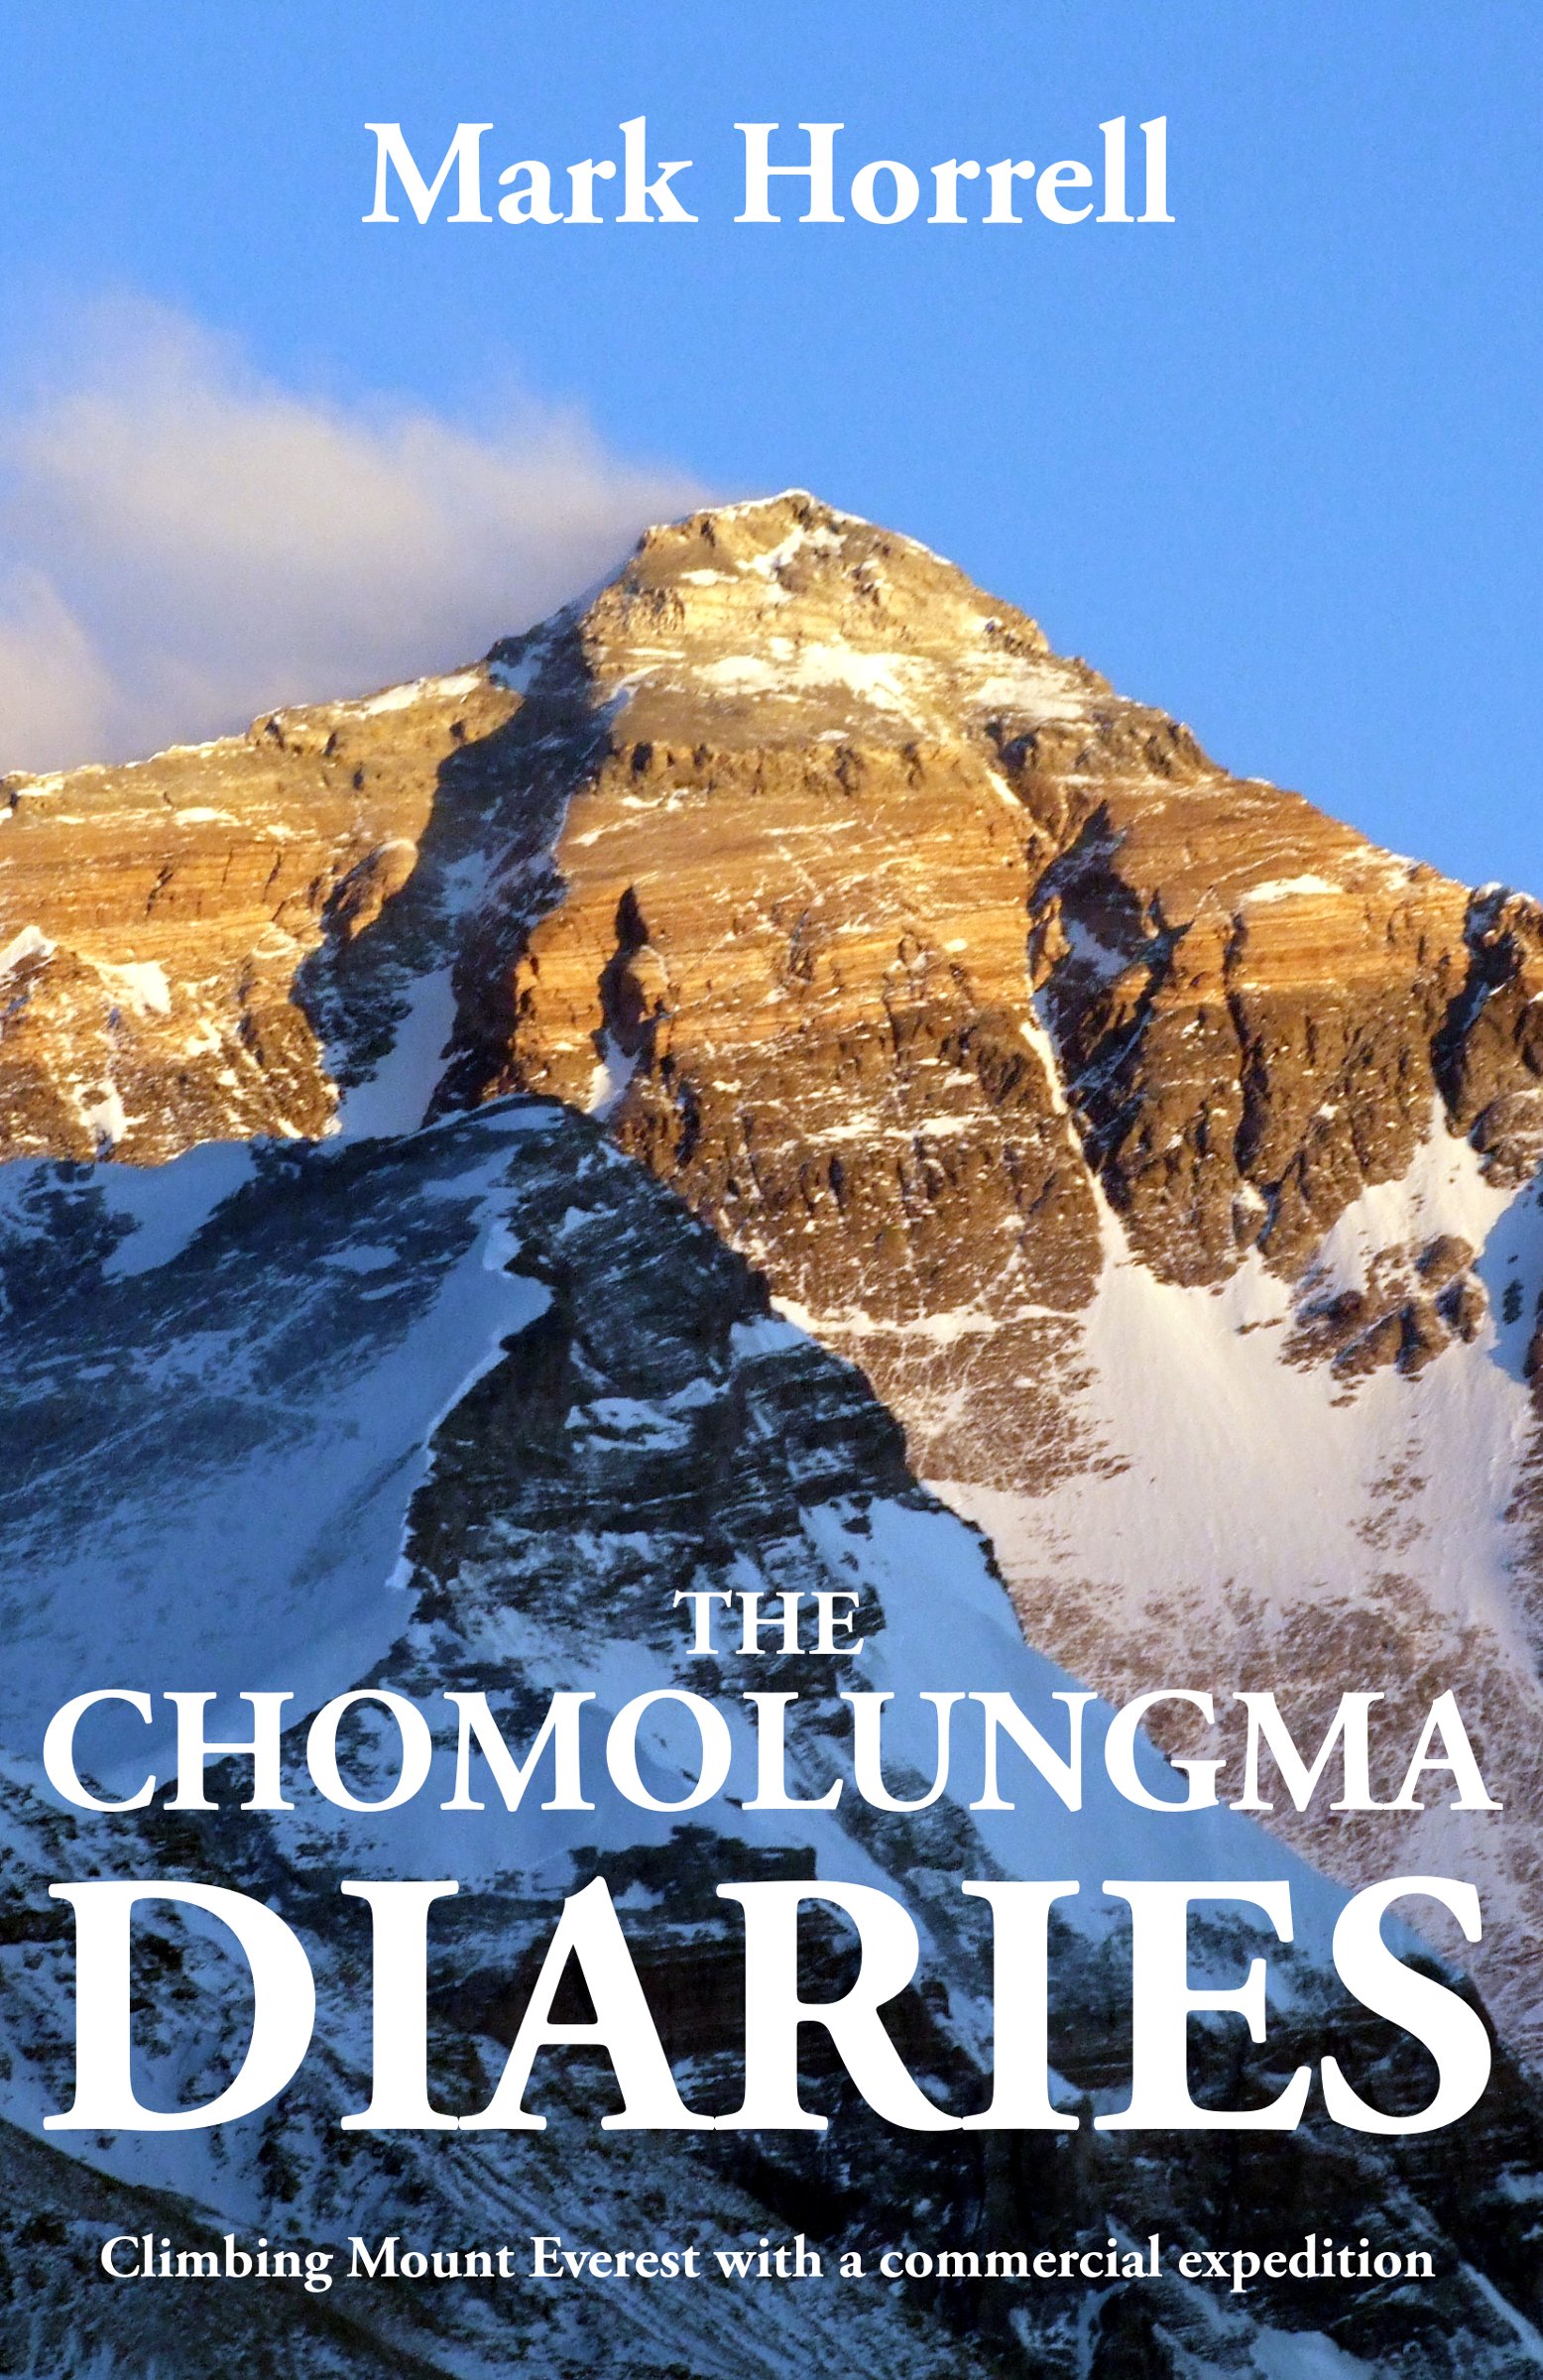 The Chomolungma Diaries: Climbing Mount Everest with a commercial